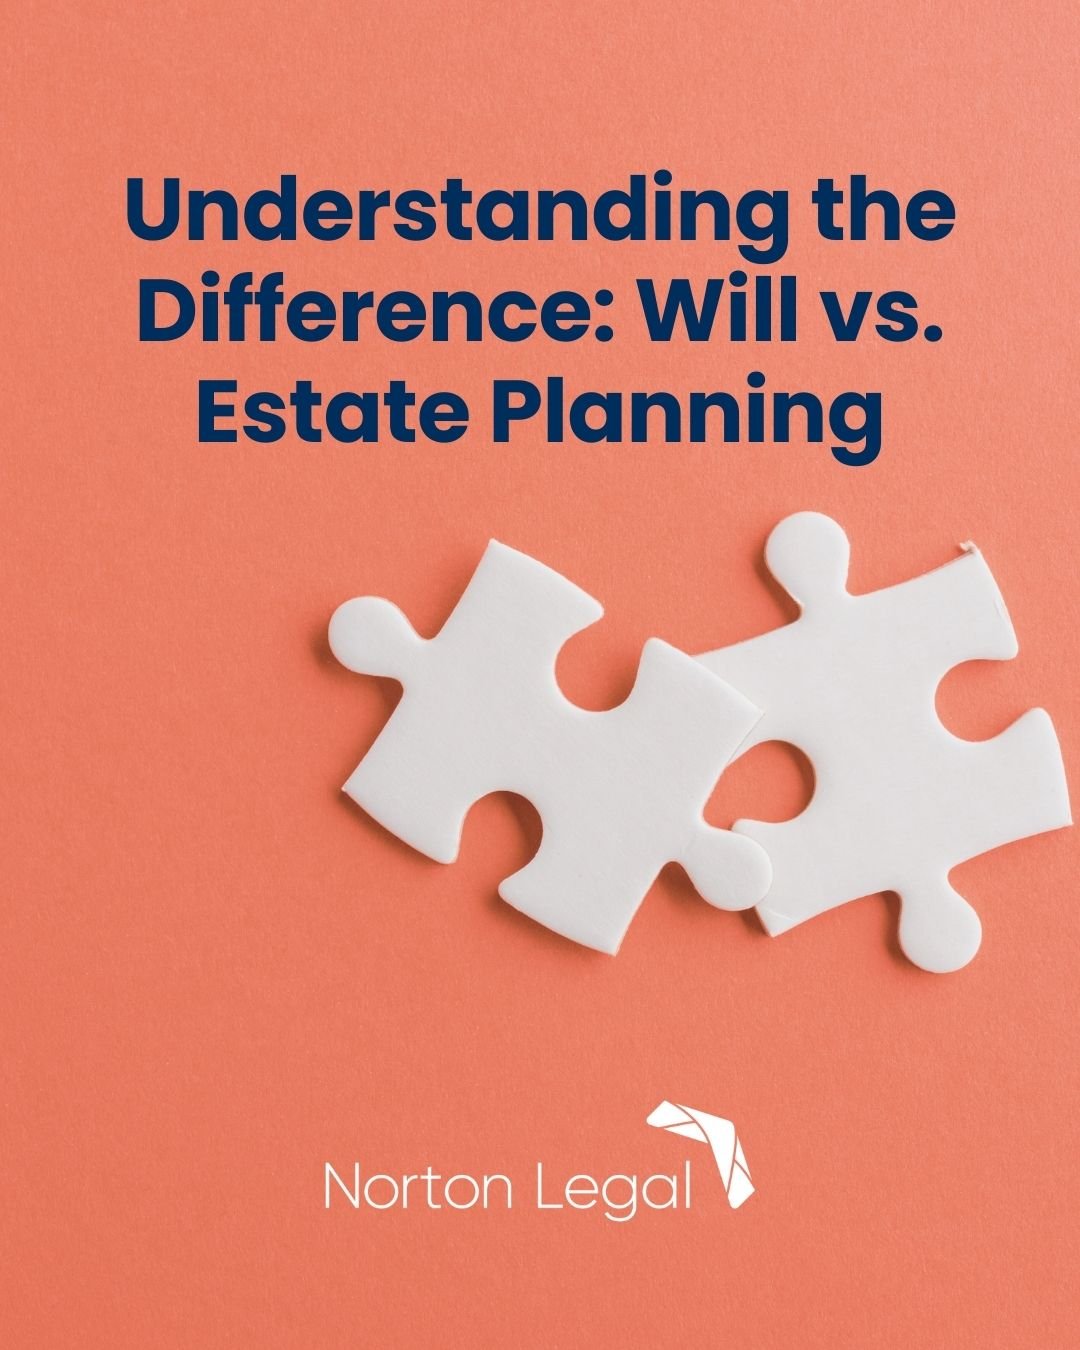 You've likely heard about writing a Will, but what about Estate Planning? Are they the same thing? Let's clear up the confusion.

📜 Writing a Will: A will is a legal document that outlines your wishes for the distribution of your assets after you pa